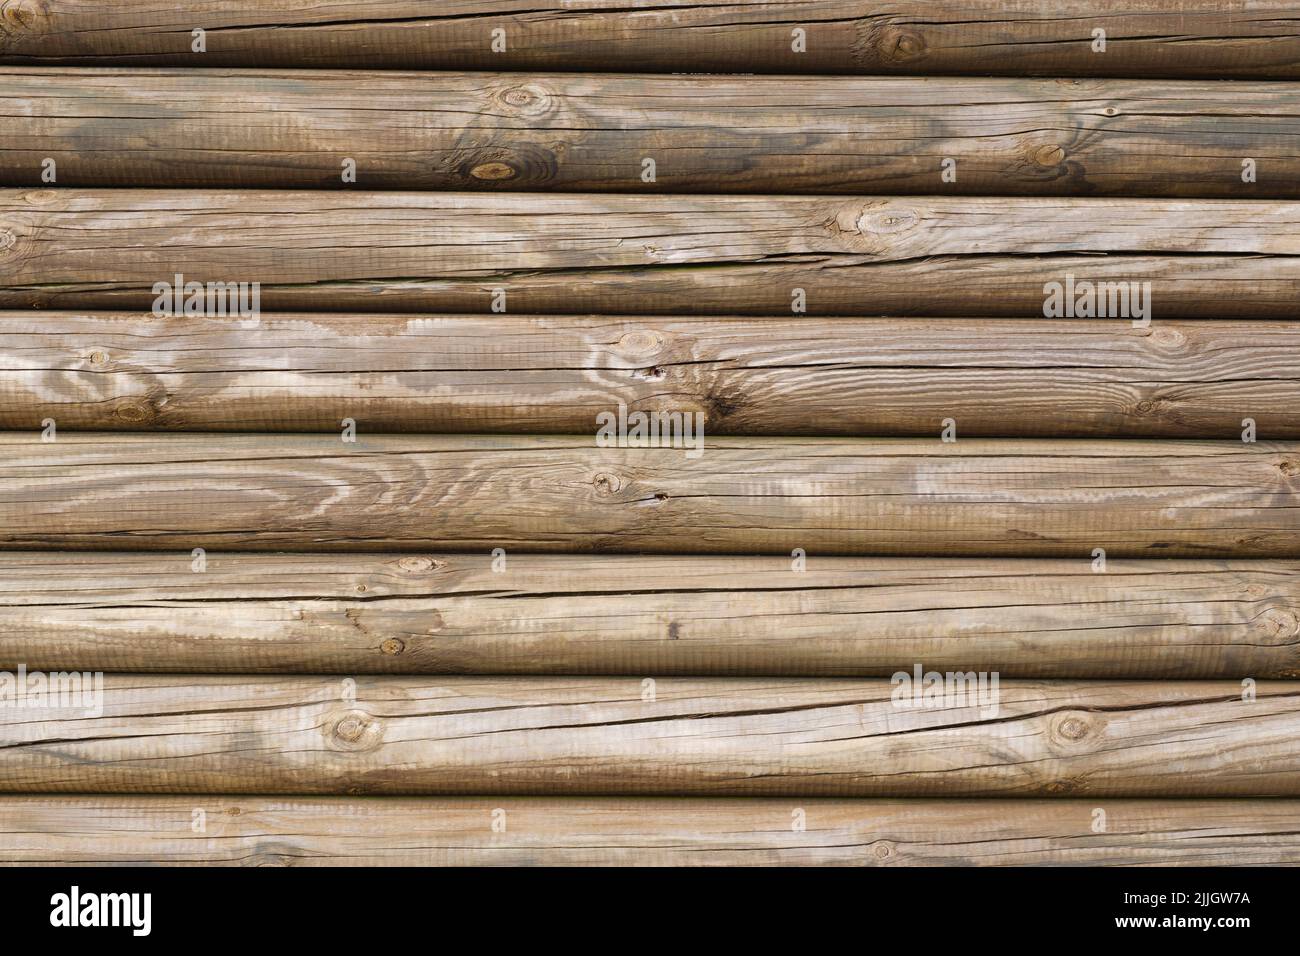 Surface of some round wooden pile Stock Photo